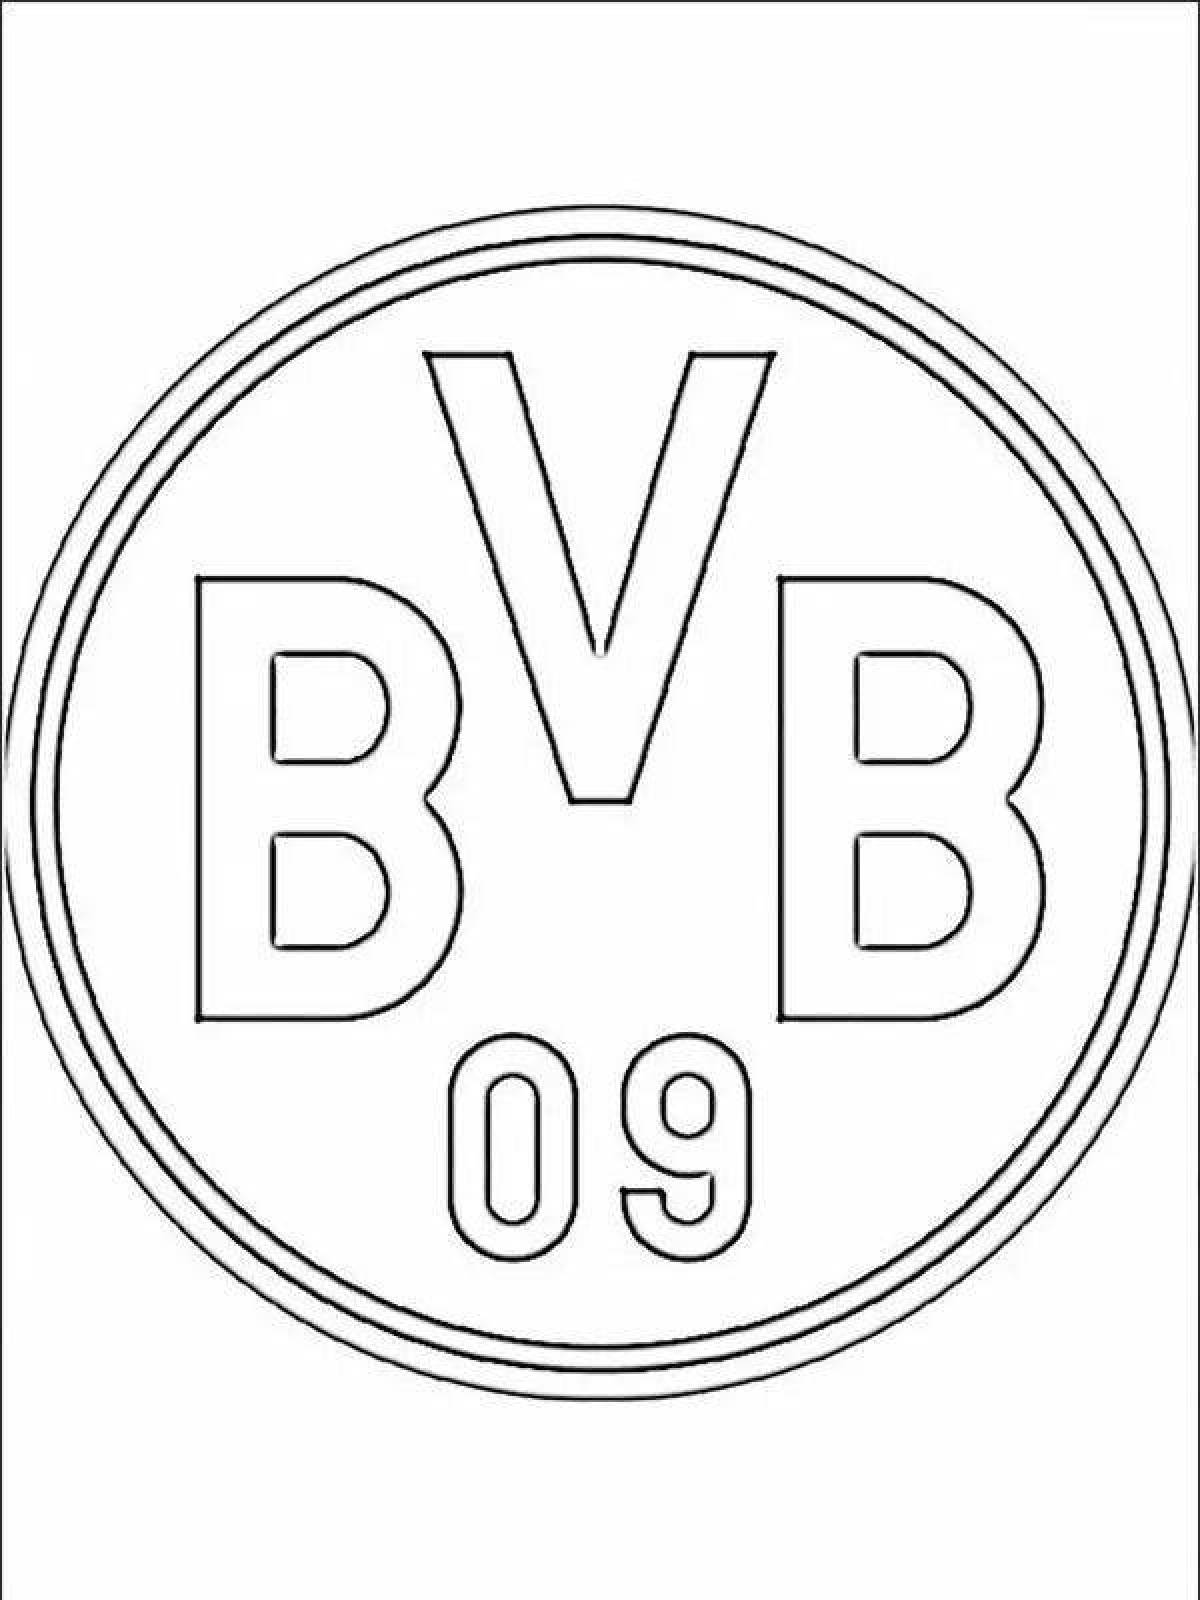 Sparkly football club badge coloring pages